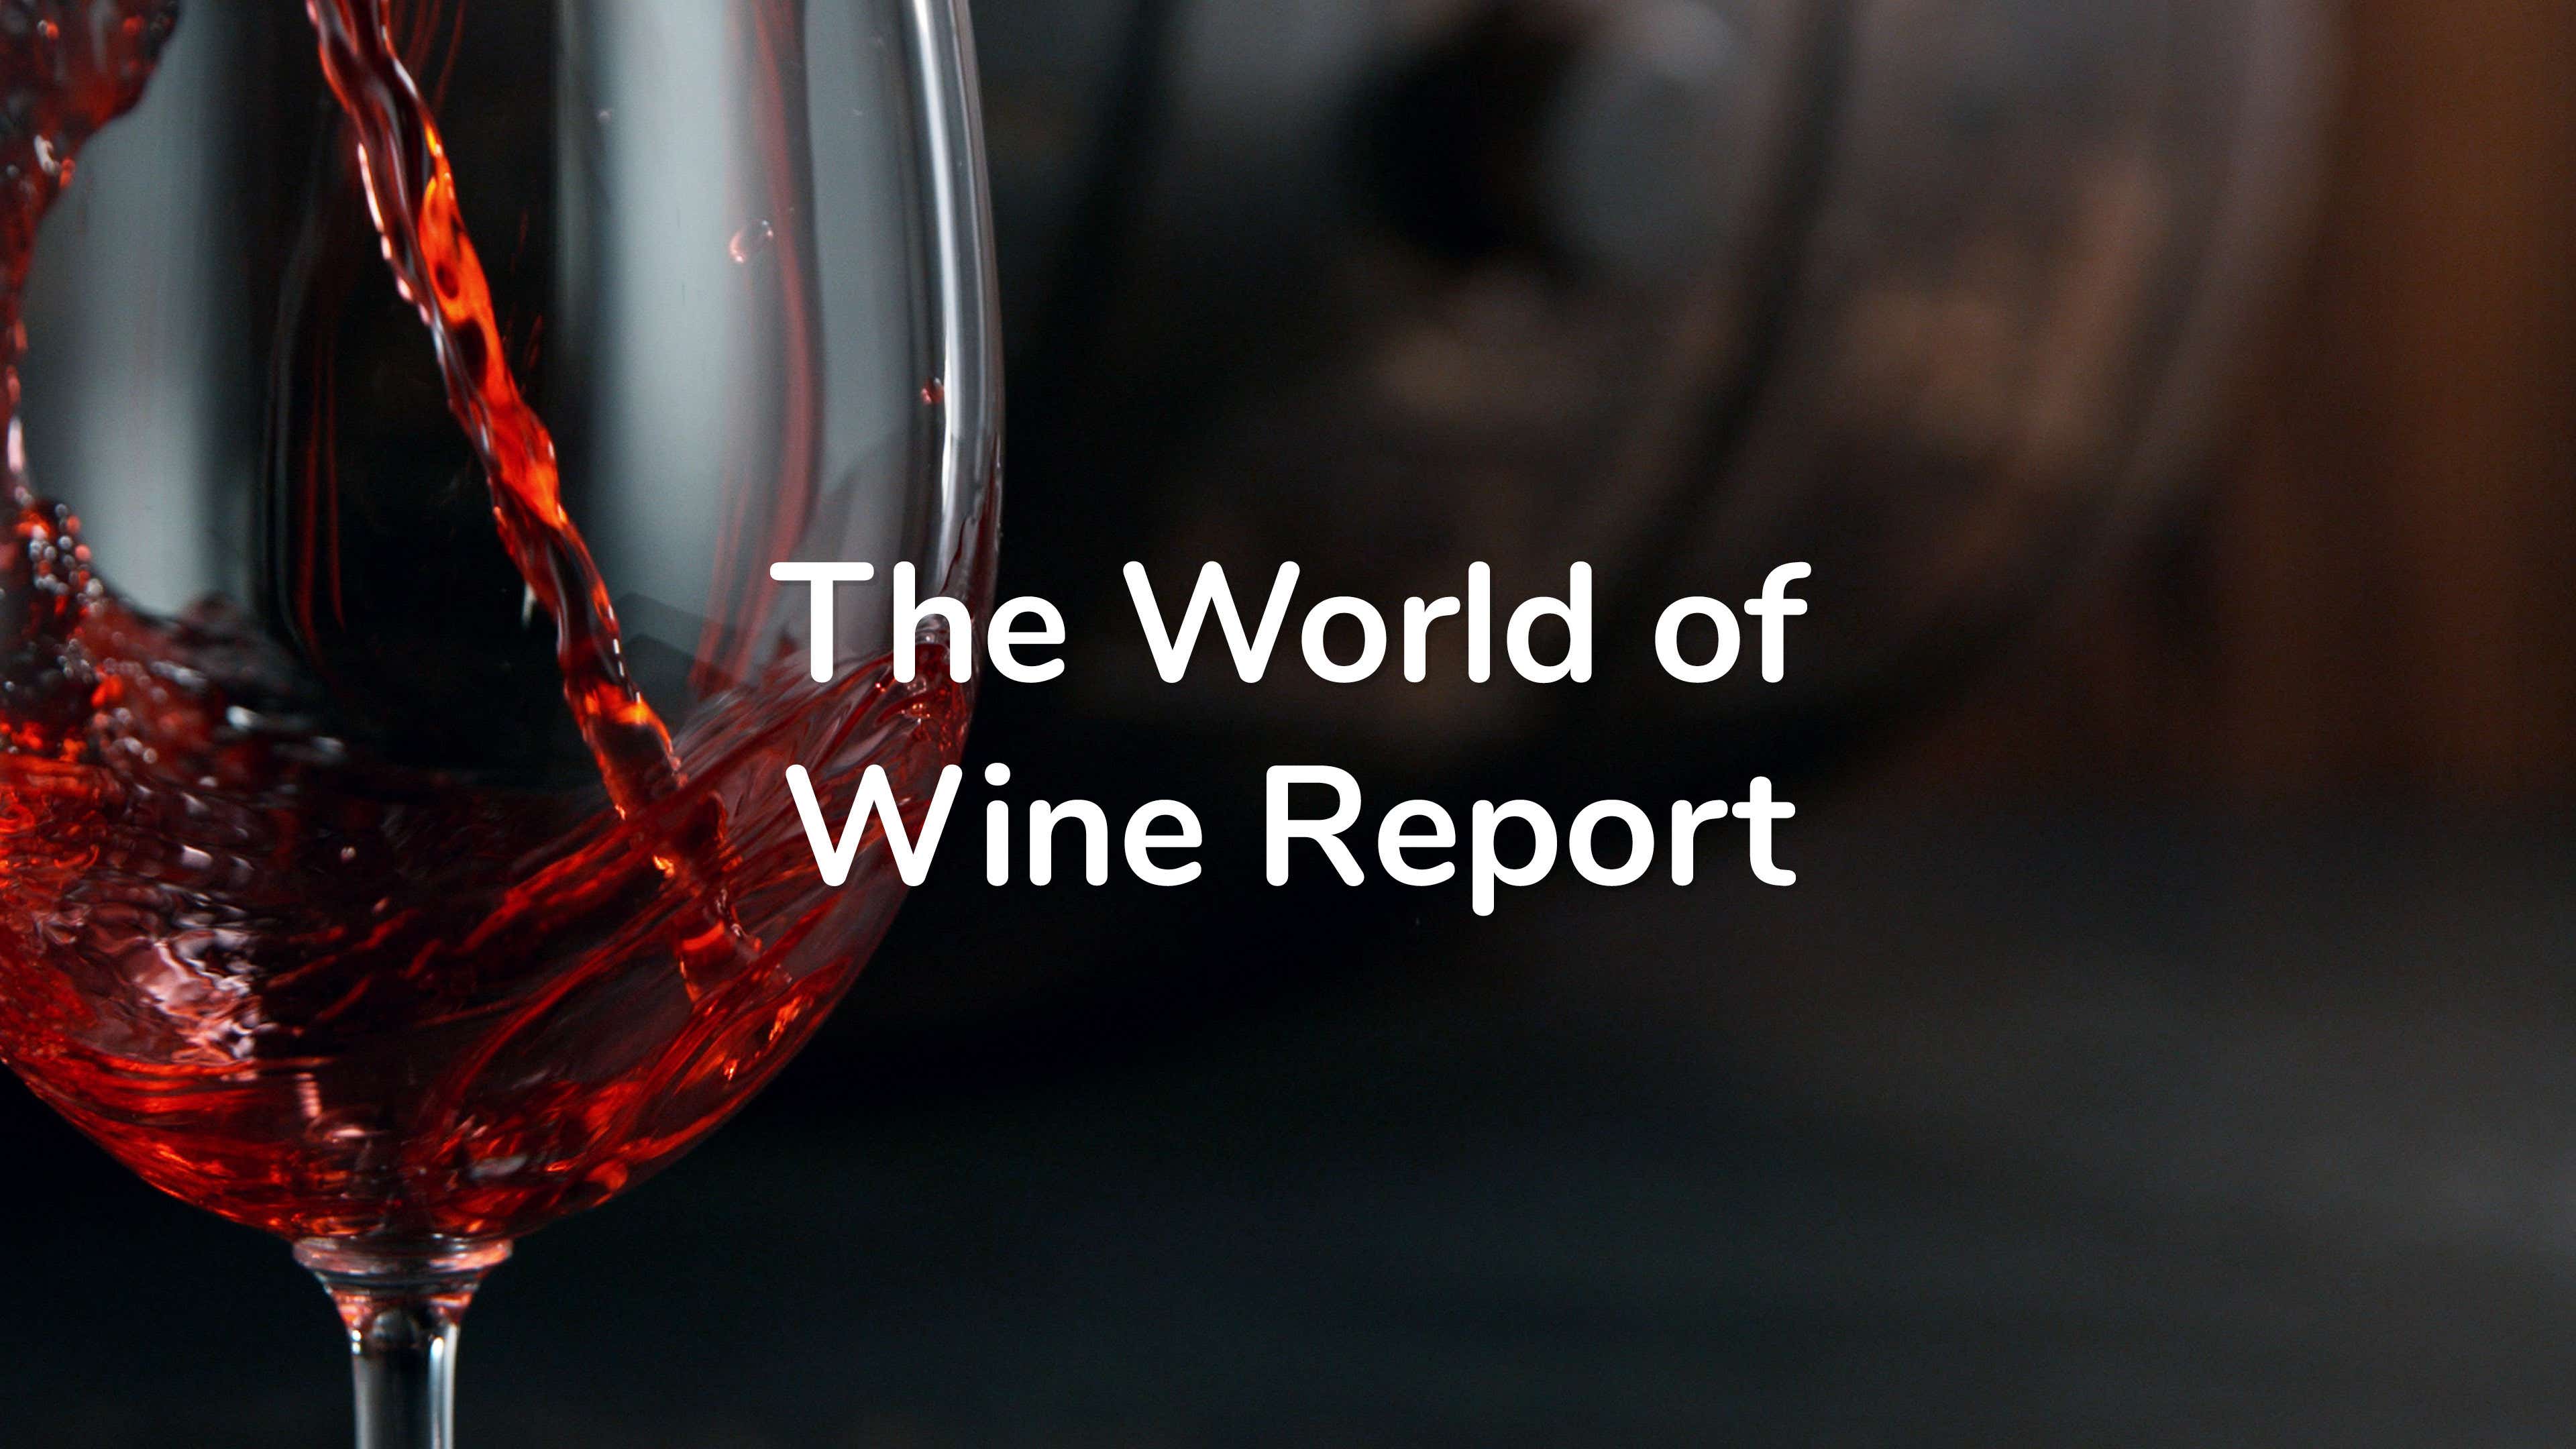 The World of Wine Report